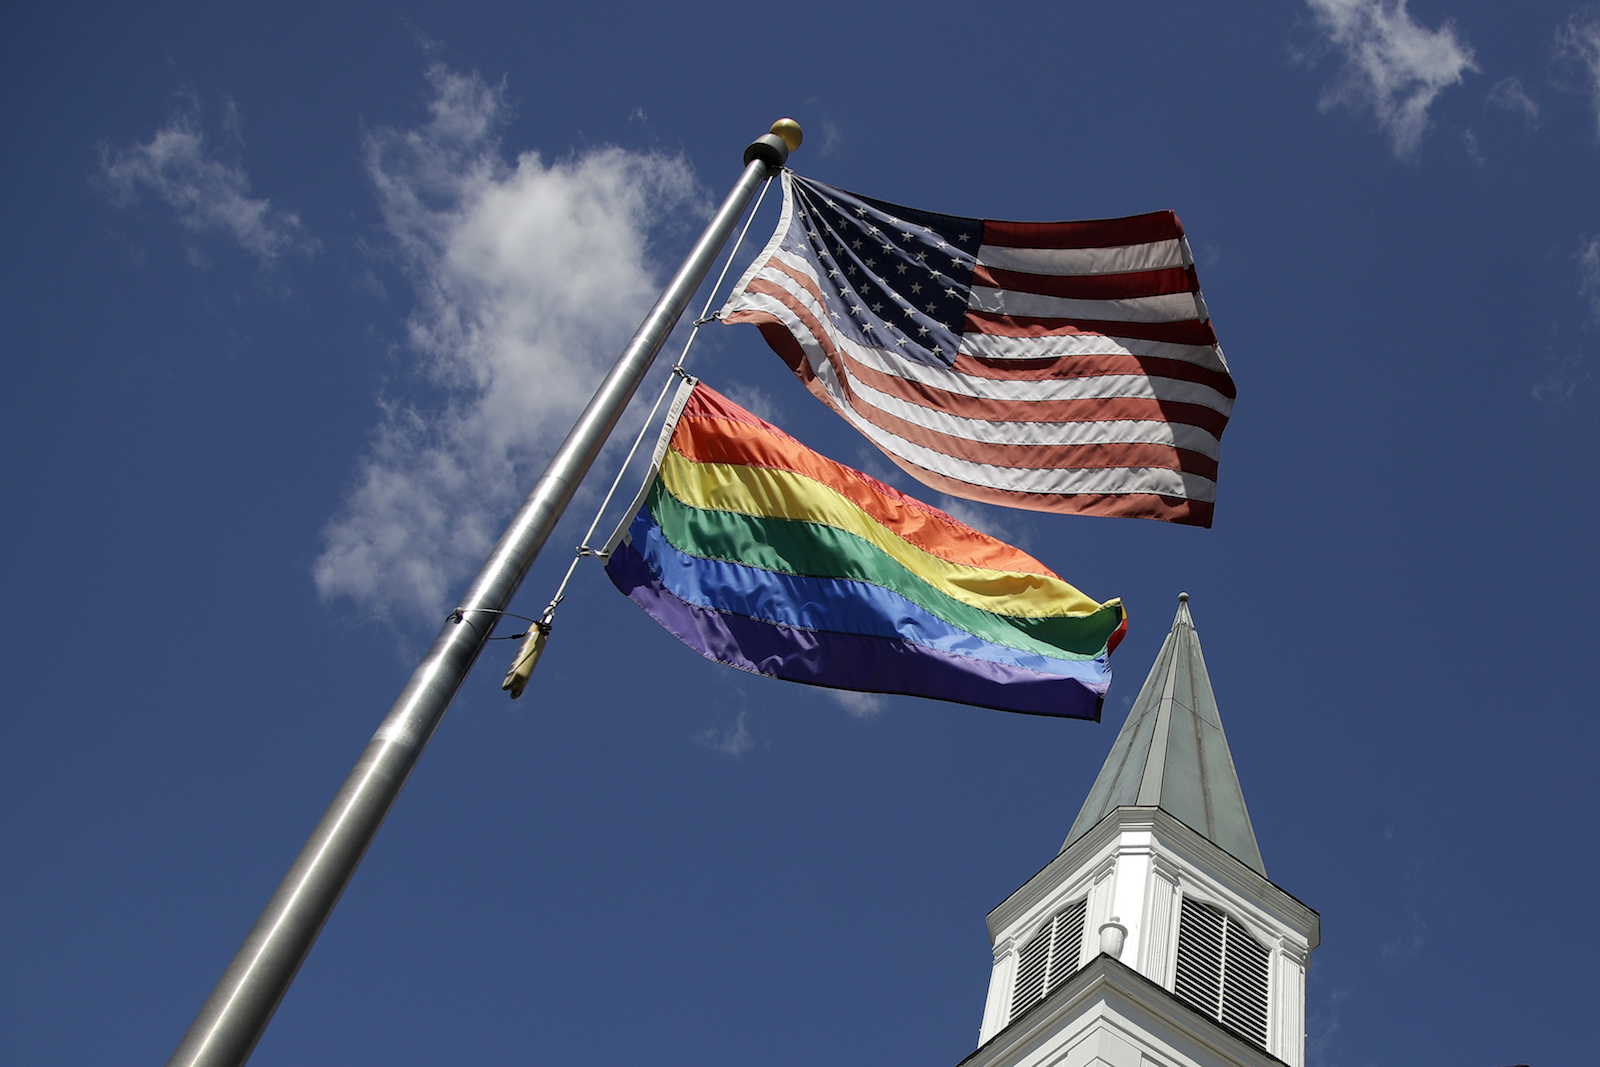 A gay pride flag flies along with the U.S. flag in front of a church in Prairie Village, Kansas, April 19, 2019. (AP Photo/Charlie Riedel)